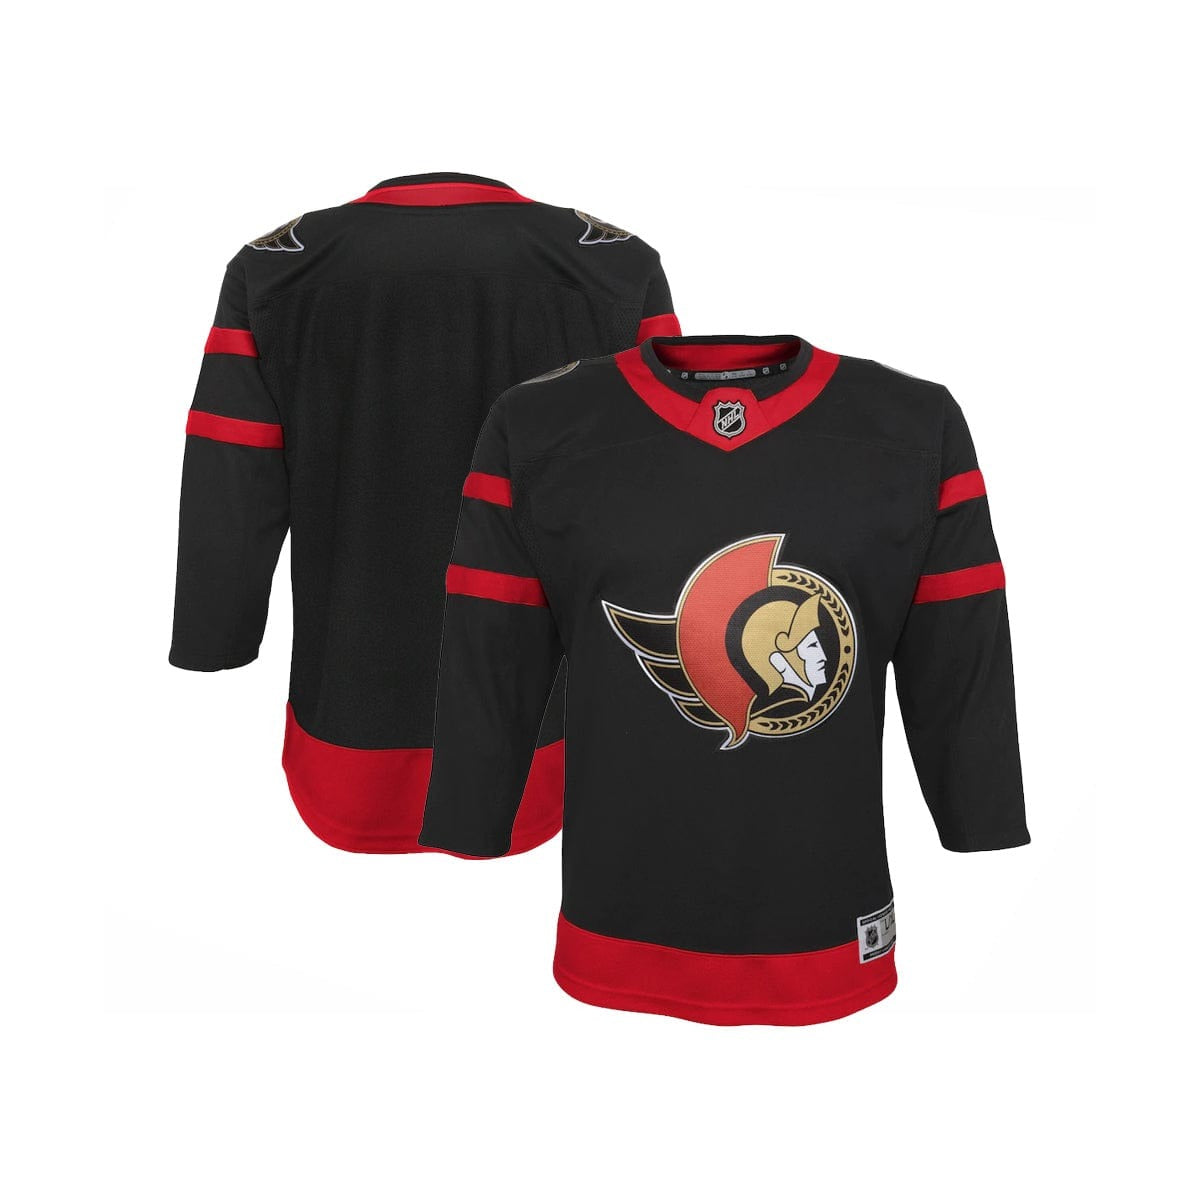 Outerstuff Toddler Arizona Coyotes Premier Home Jersey